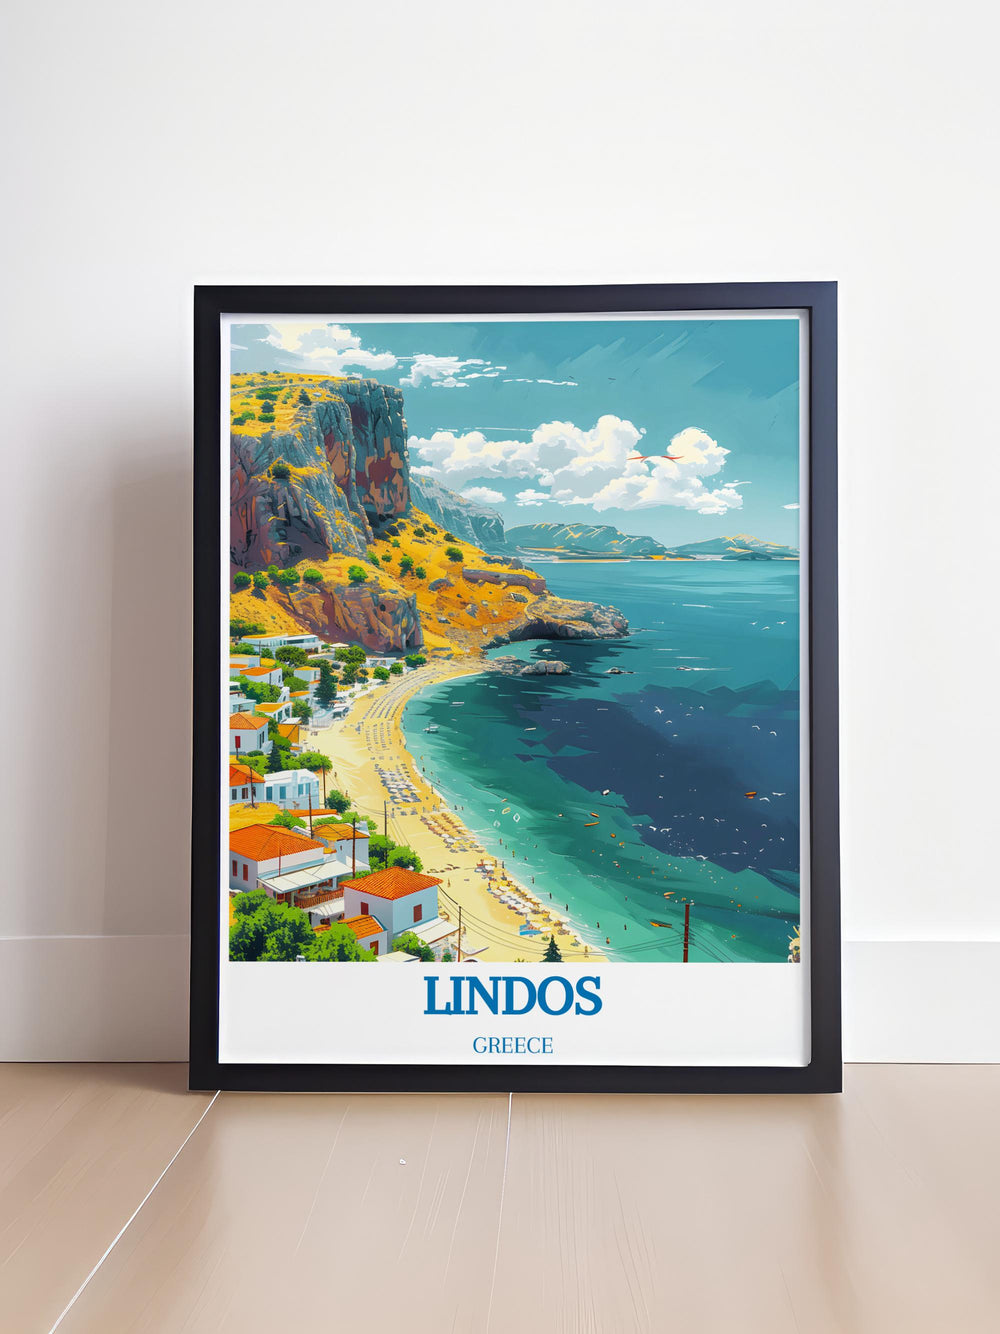 Print of Greece showcasing the ancient ruins of Rhodes, great for those who appreciate historical and cultural art.